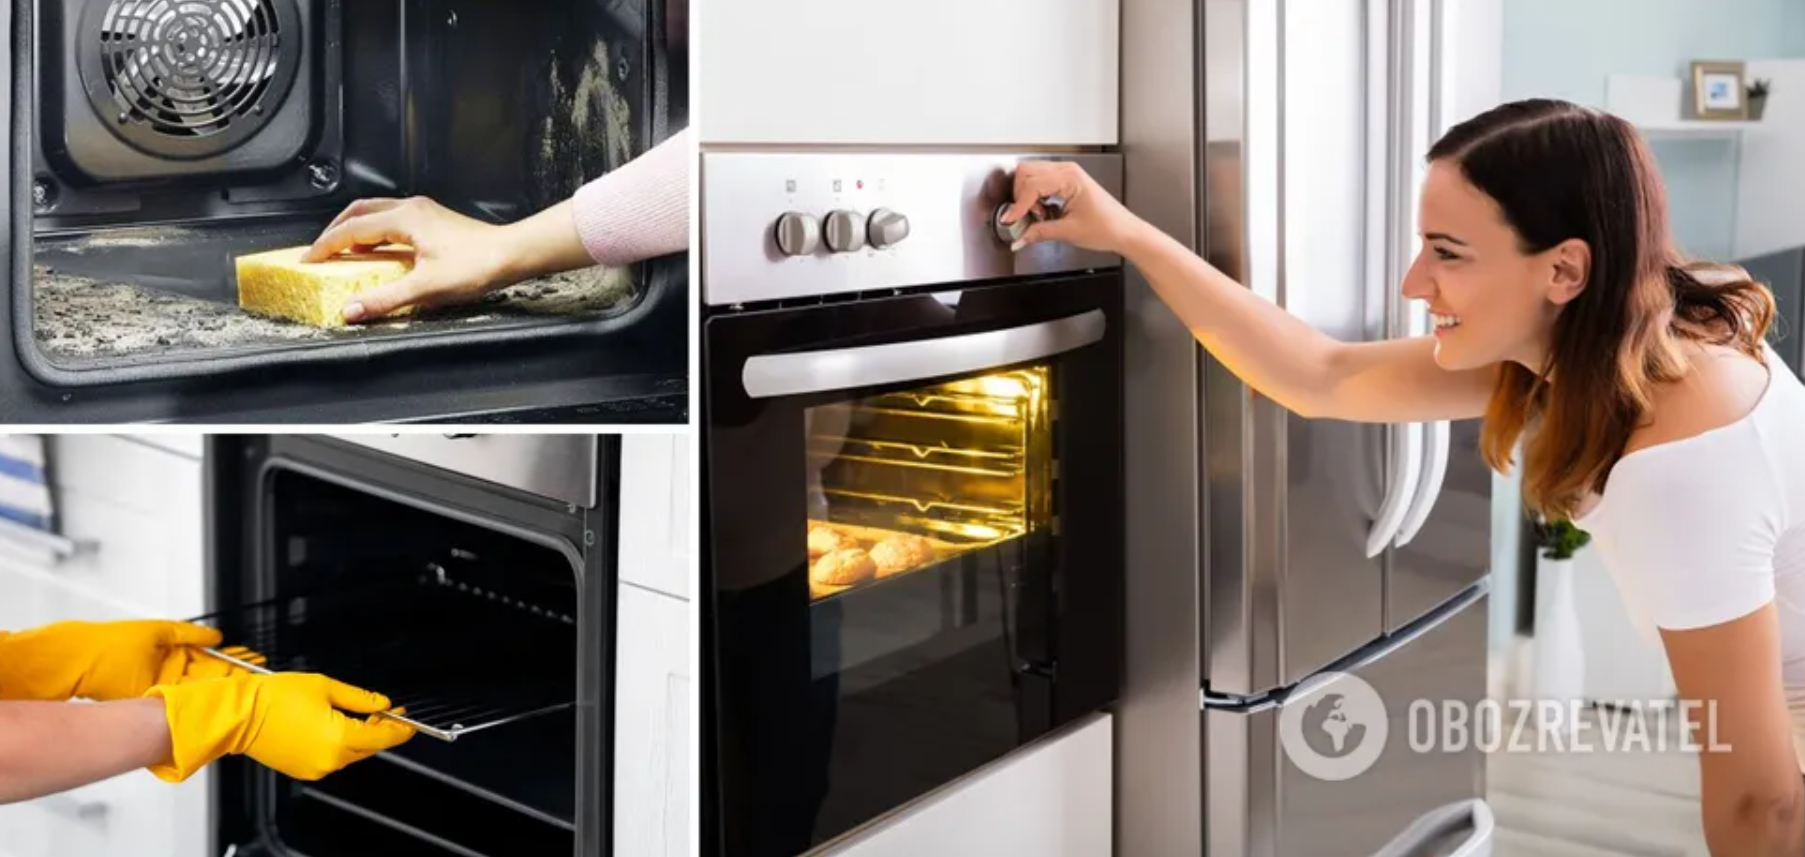 How to clean the oven quickly and effectively